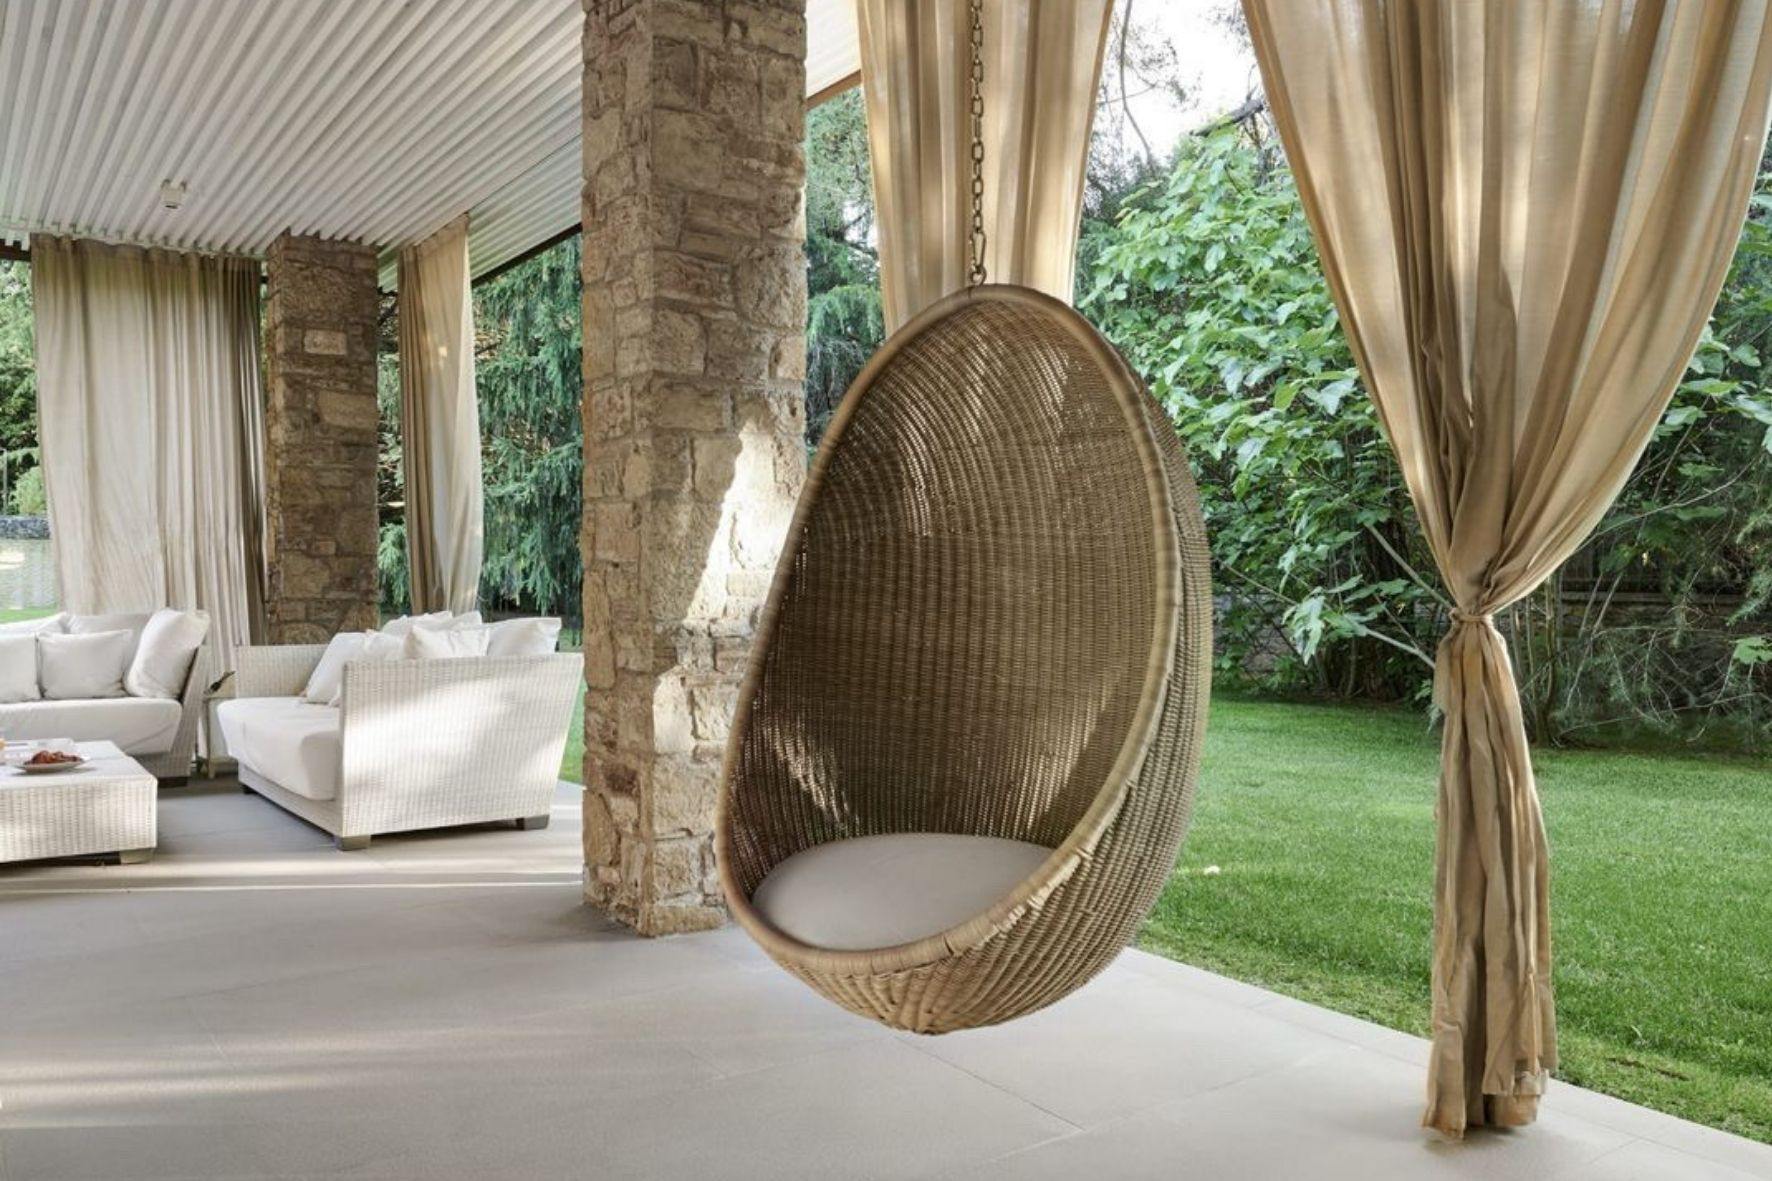 Cocoon Yourself in Style and Comfort With a Patio Egg Chair